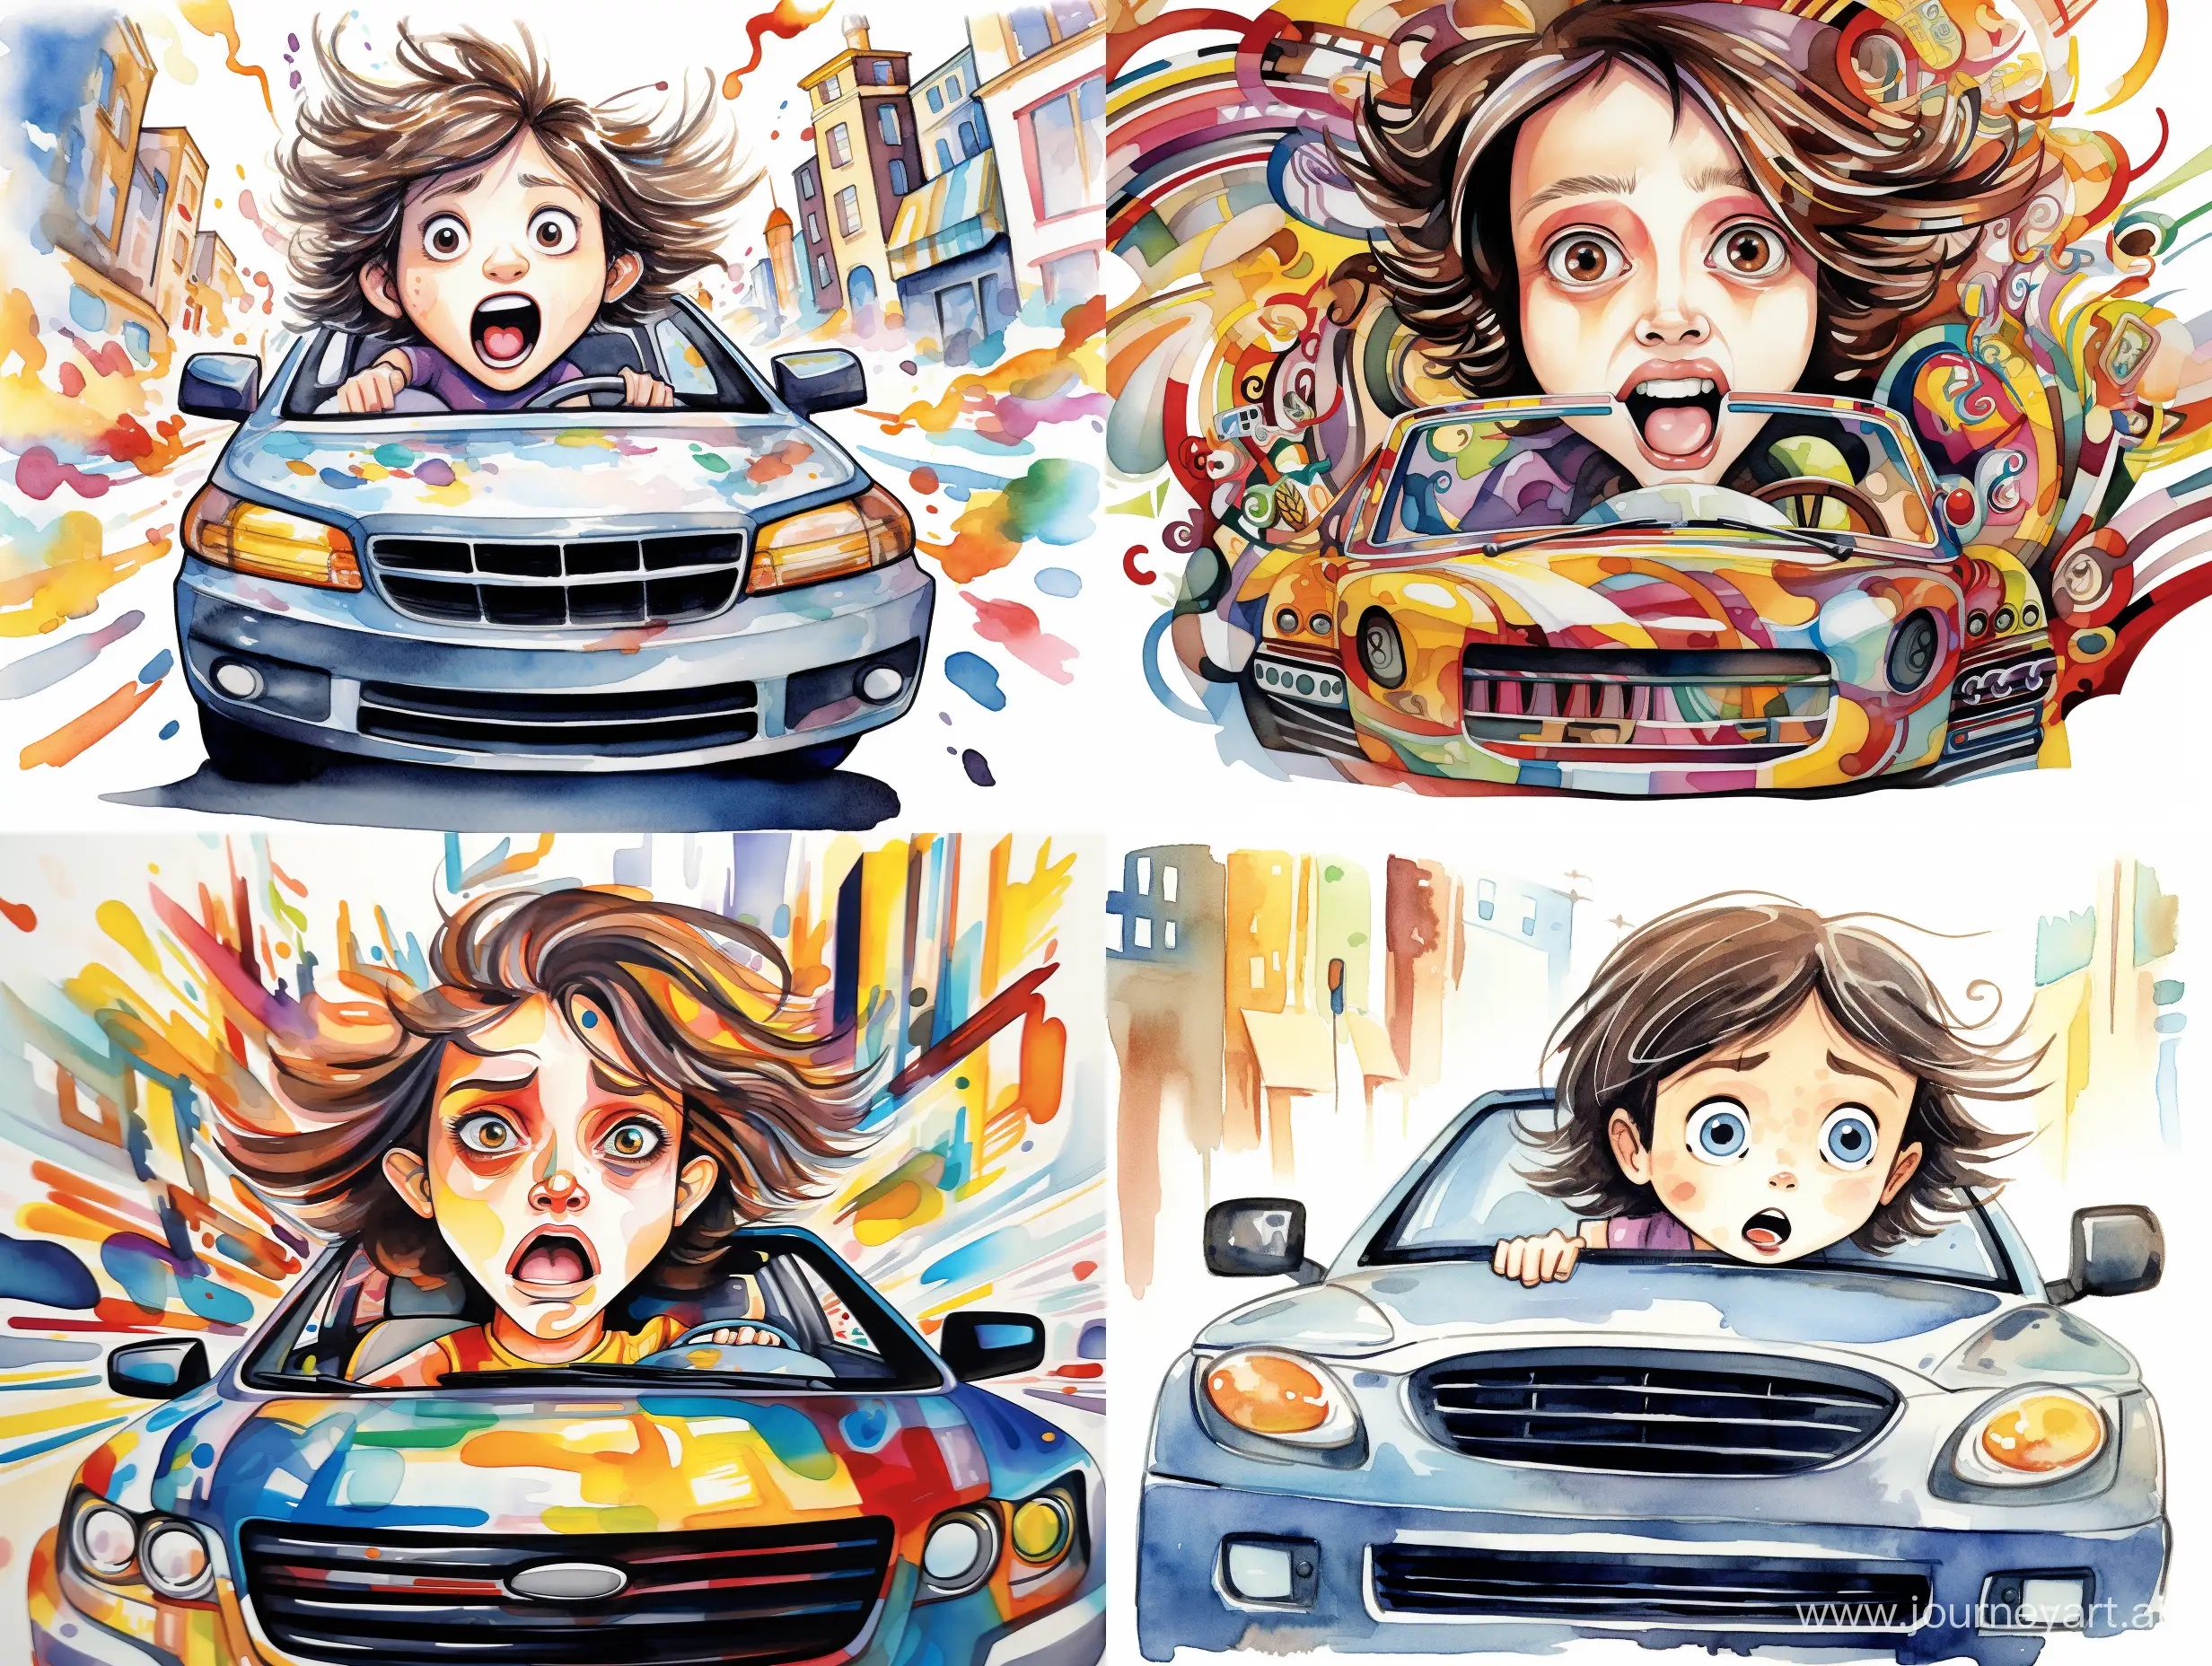 A three-year-old girl, brown hair above her shoulders, with brown eyes, long eyelashes, small mouth, thin lips, rides in a large white children's car down the street, stylized caricature, decorative, flat illustration,on a white background, watercolor, ink, Victor Ngai style, bright colors